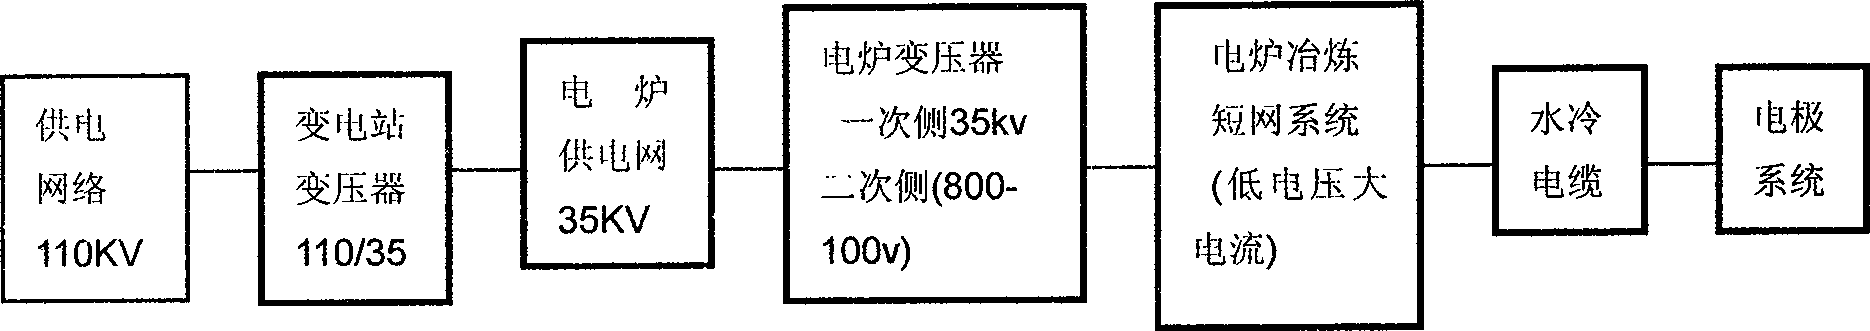 Star connection method of ore furnace secondary low-voltage compensation device system